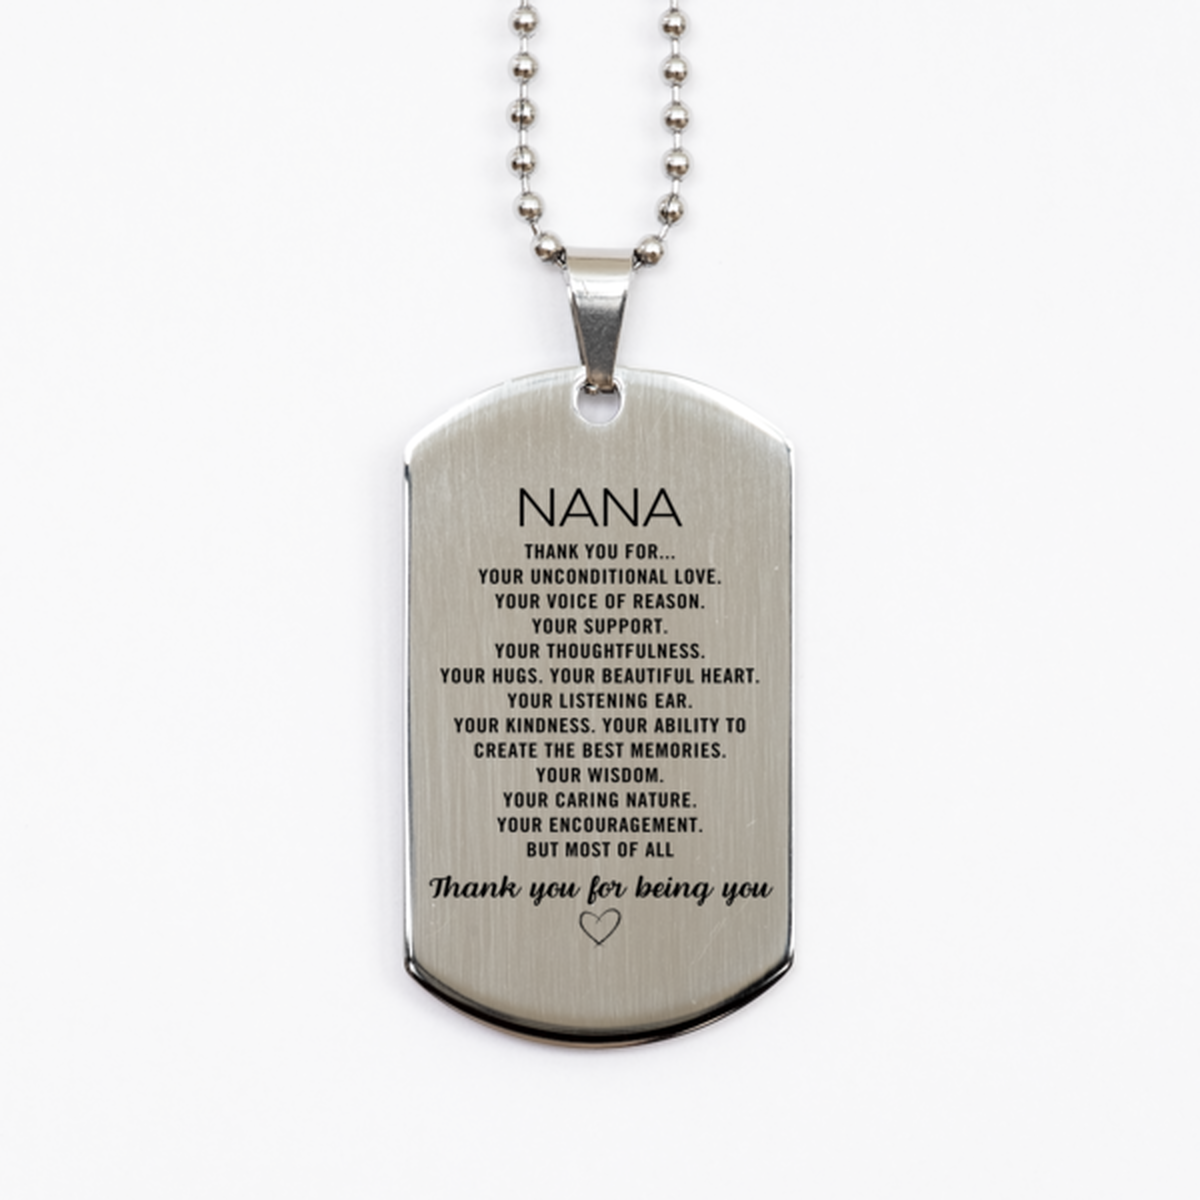 Nana Silver Dog Tag Custom, Engraved Gifts For Nana Christmas Graduation Birthday Gifts for Men Women Nana Thank you for Your unconditional love